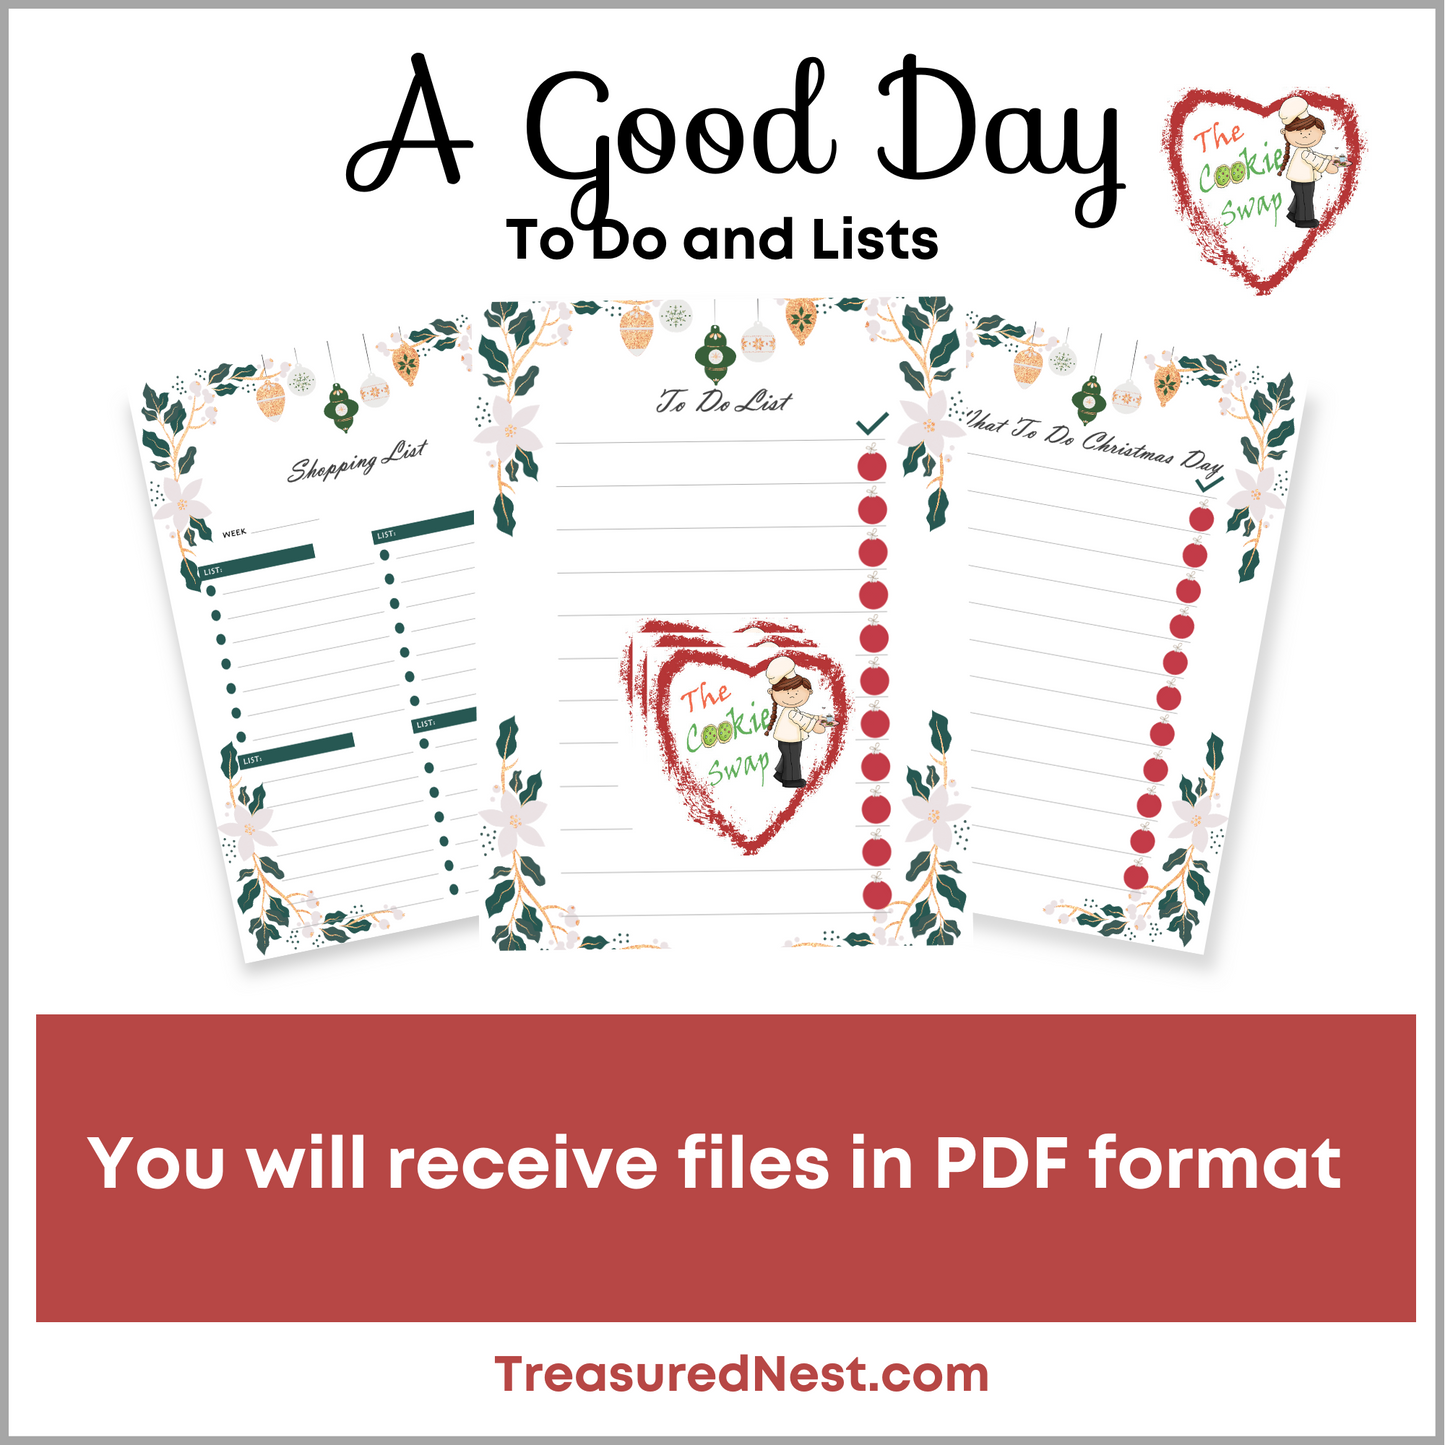 To Do Lists in pdf format